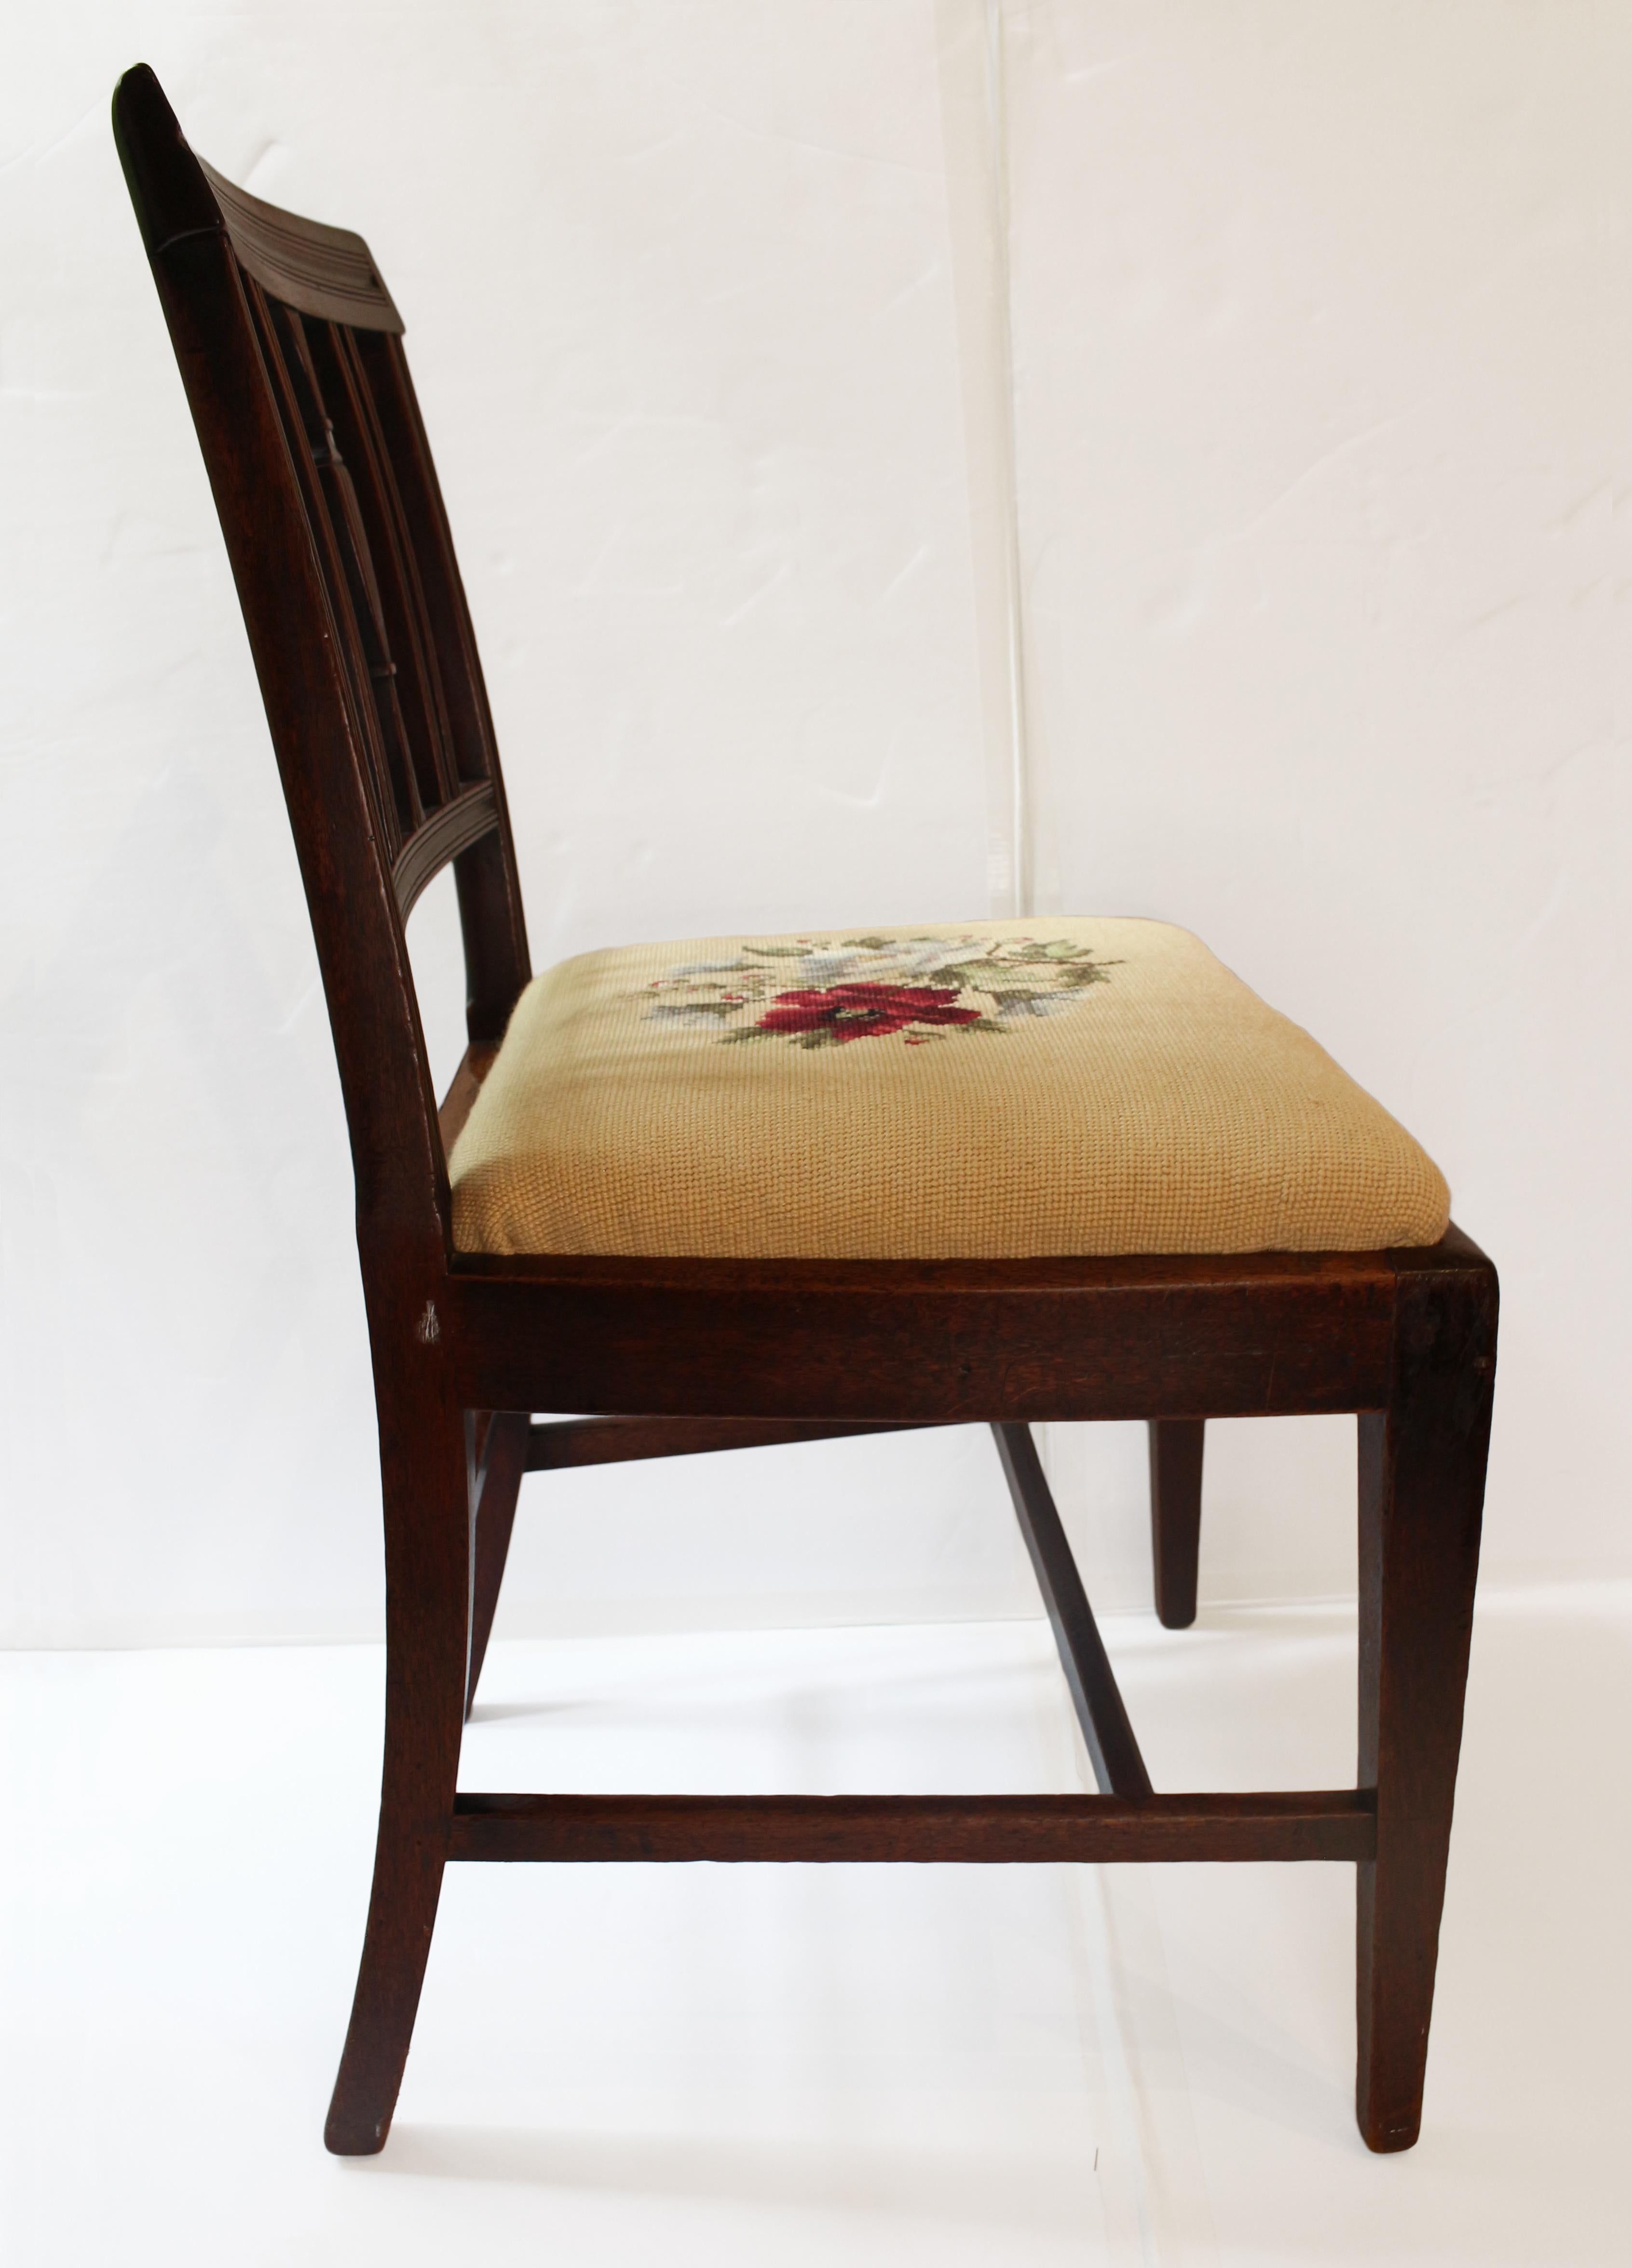 George III side chair, circa 1790 neoclassical design, English. Mahogany. Reeded back & stiles with central urn. Small flaw & repair to crest rail. Raised on square tapered legs. Slip seat with needlepoint upholstery.
20